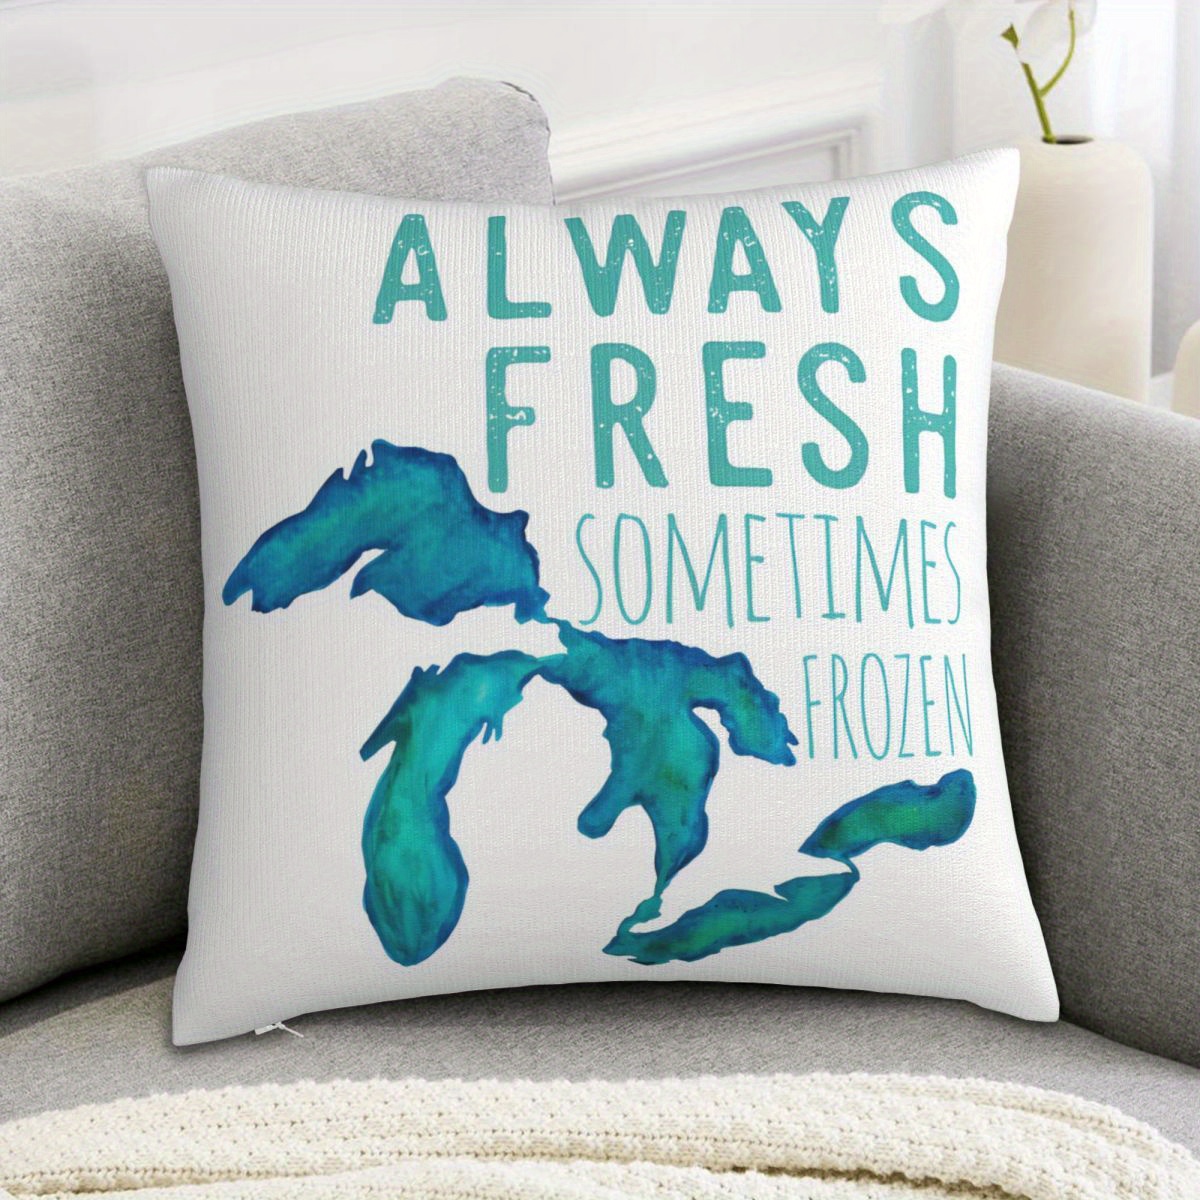 

Coastal Decorative Throw Pillow Cover, " Sometimes " Double-sided Print, Polyester Non-woven Fabric, Zipper Closure, Machine Washable - Fits Various Room Types, 18x18 Inches (1pc, No Insert)